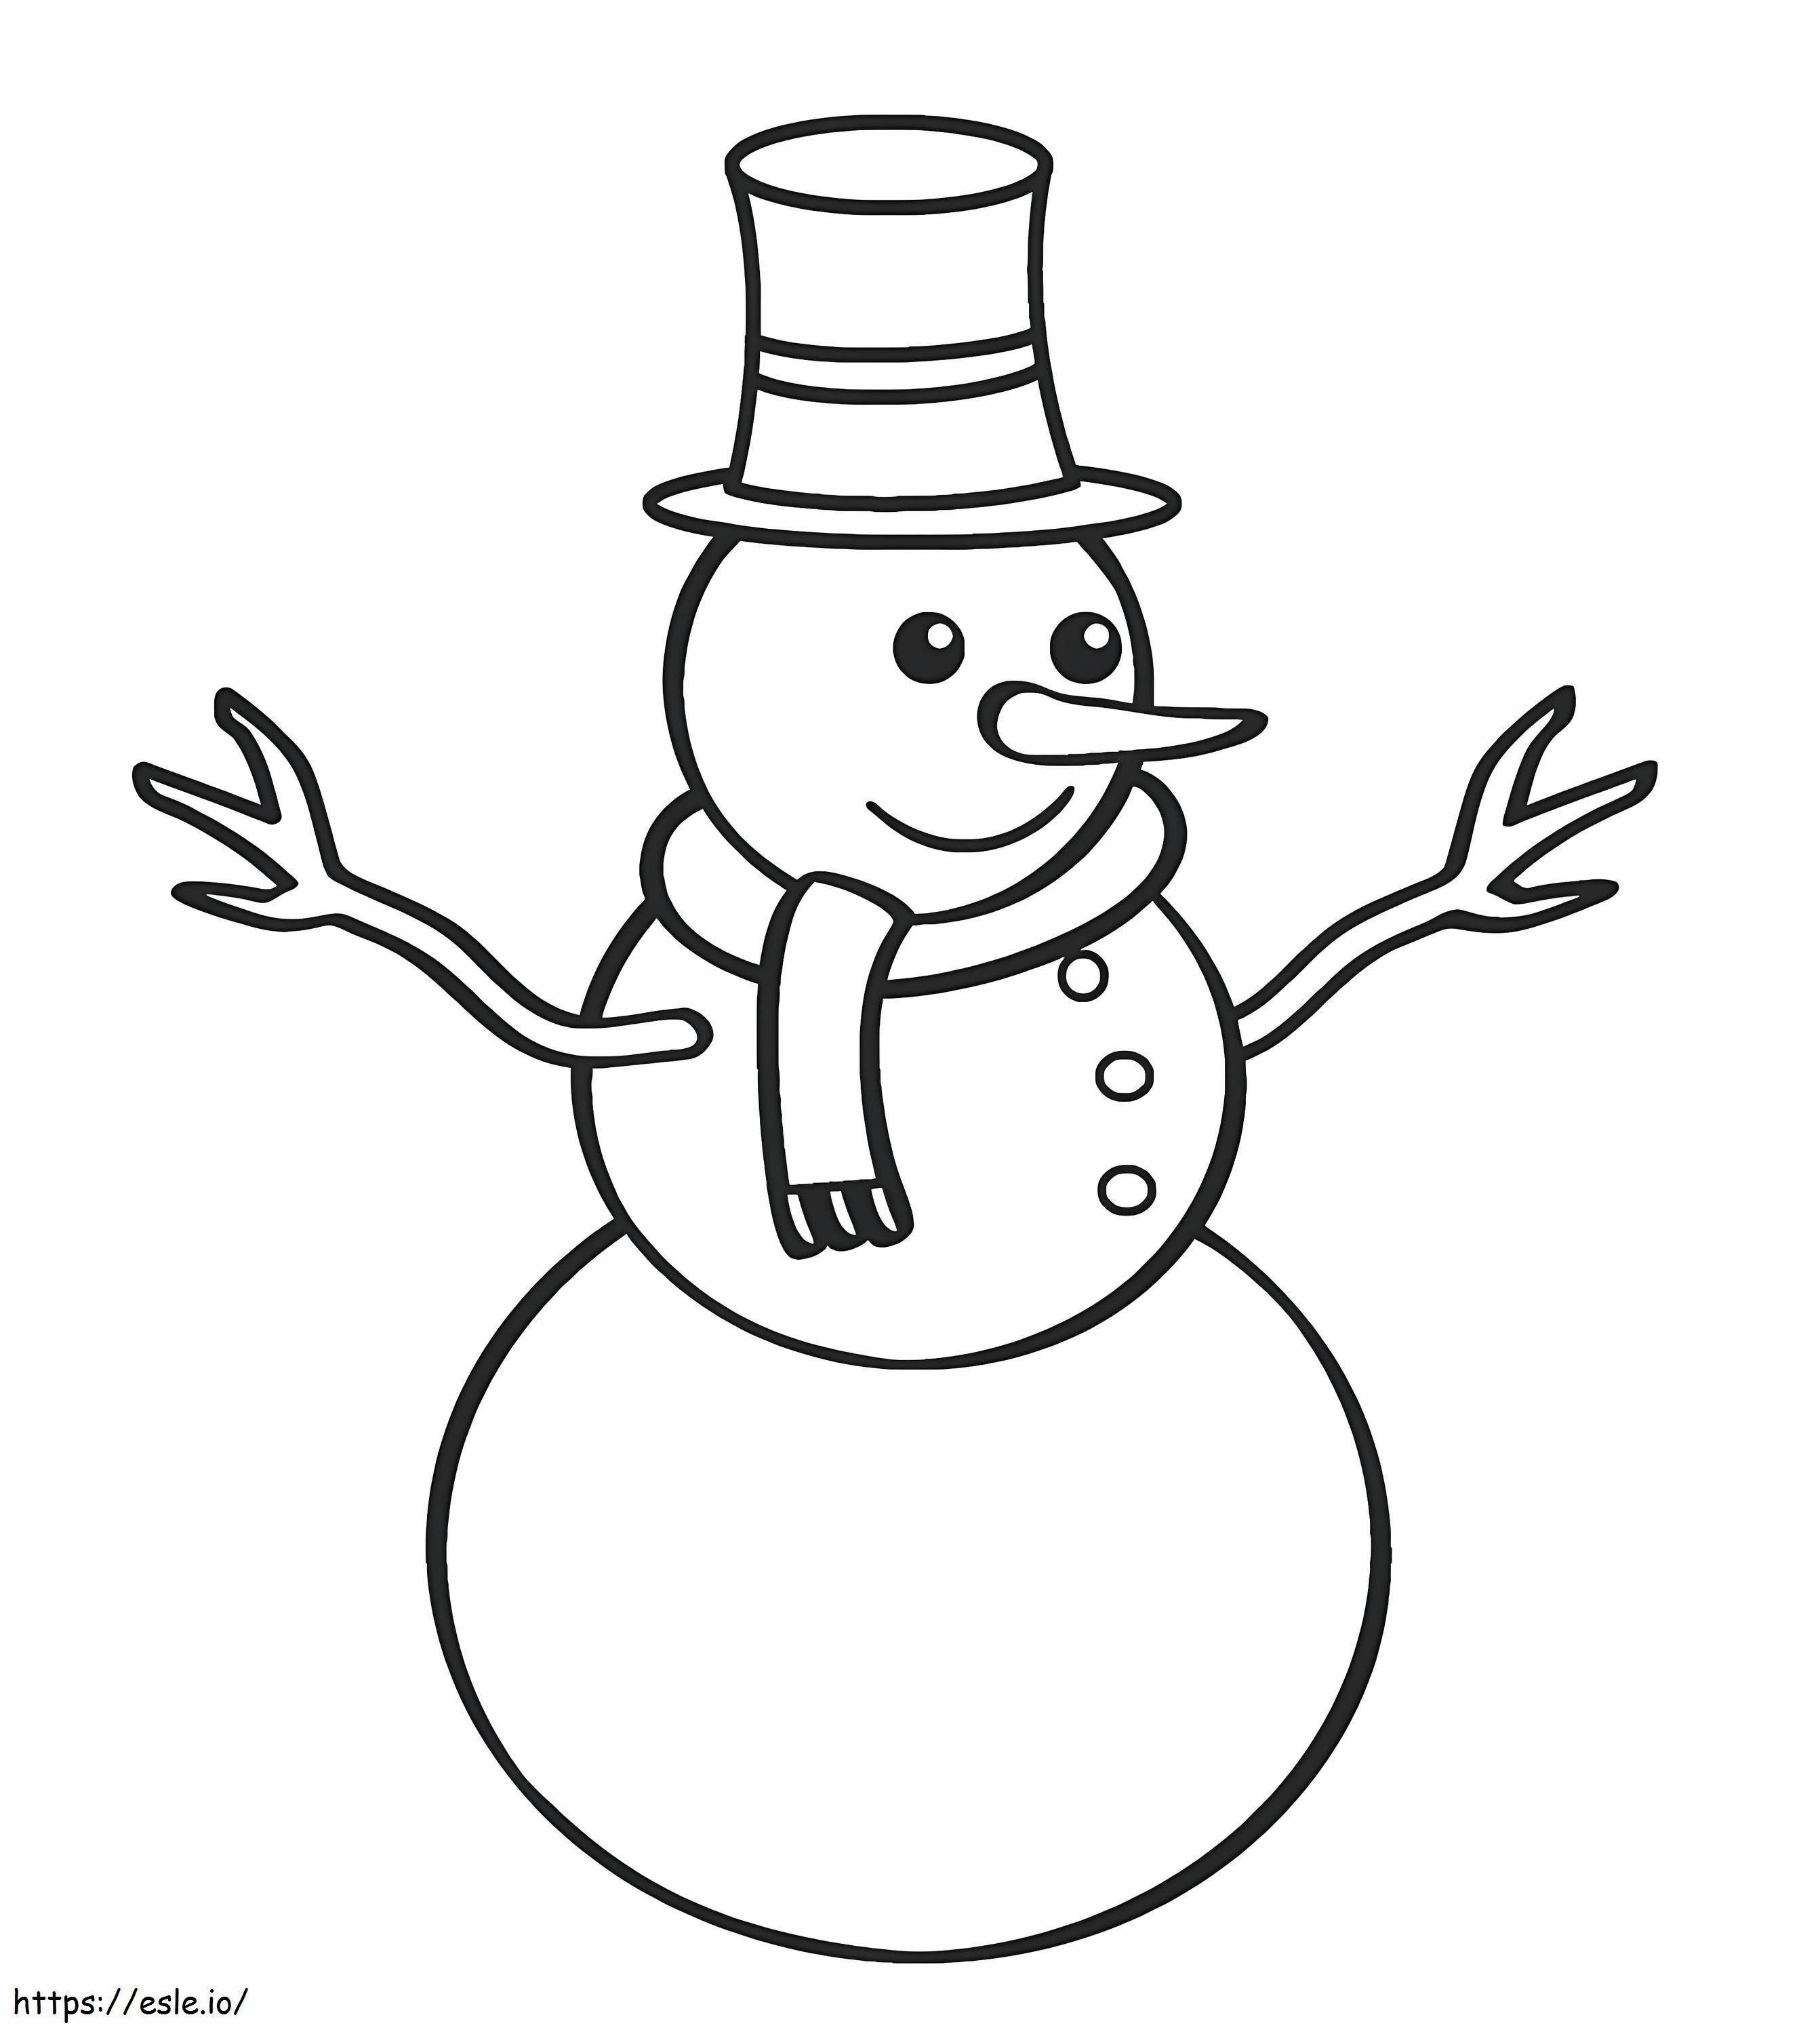 Awesome Snowman coloring page